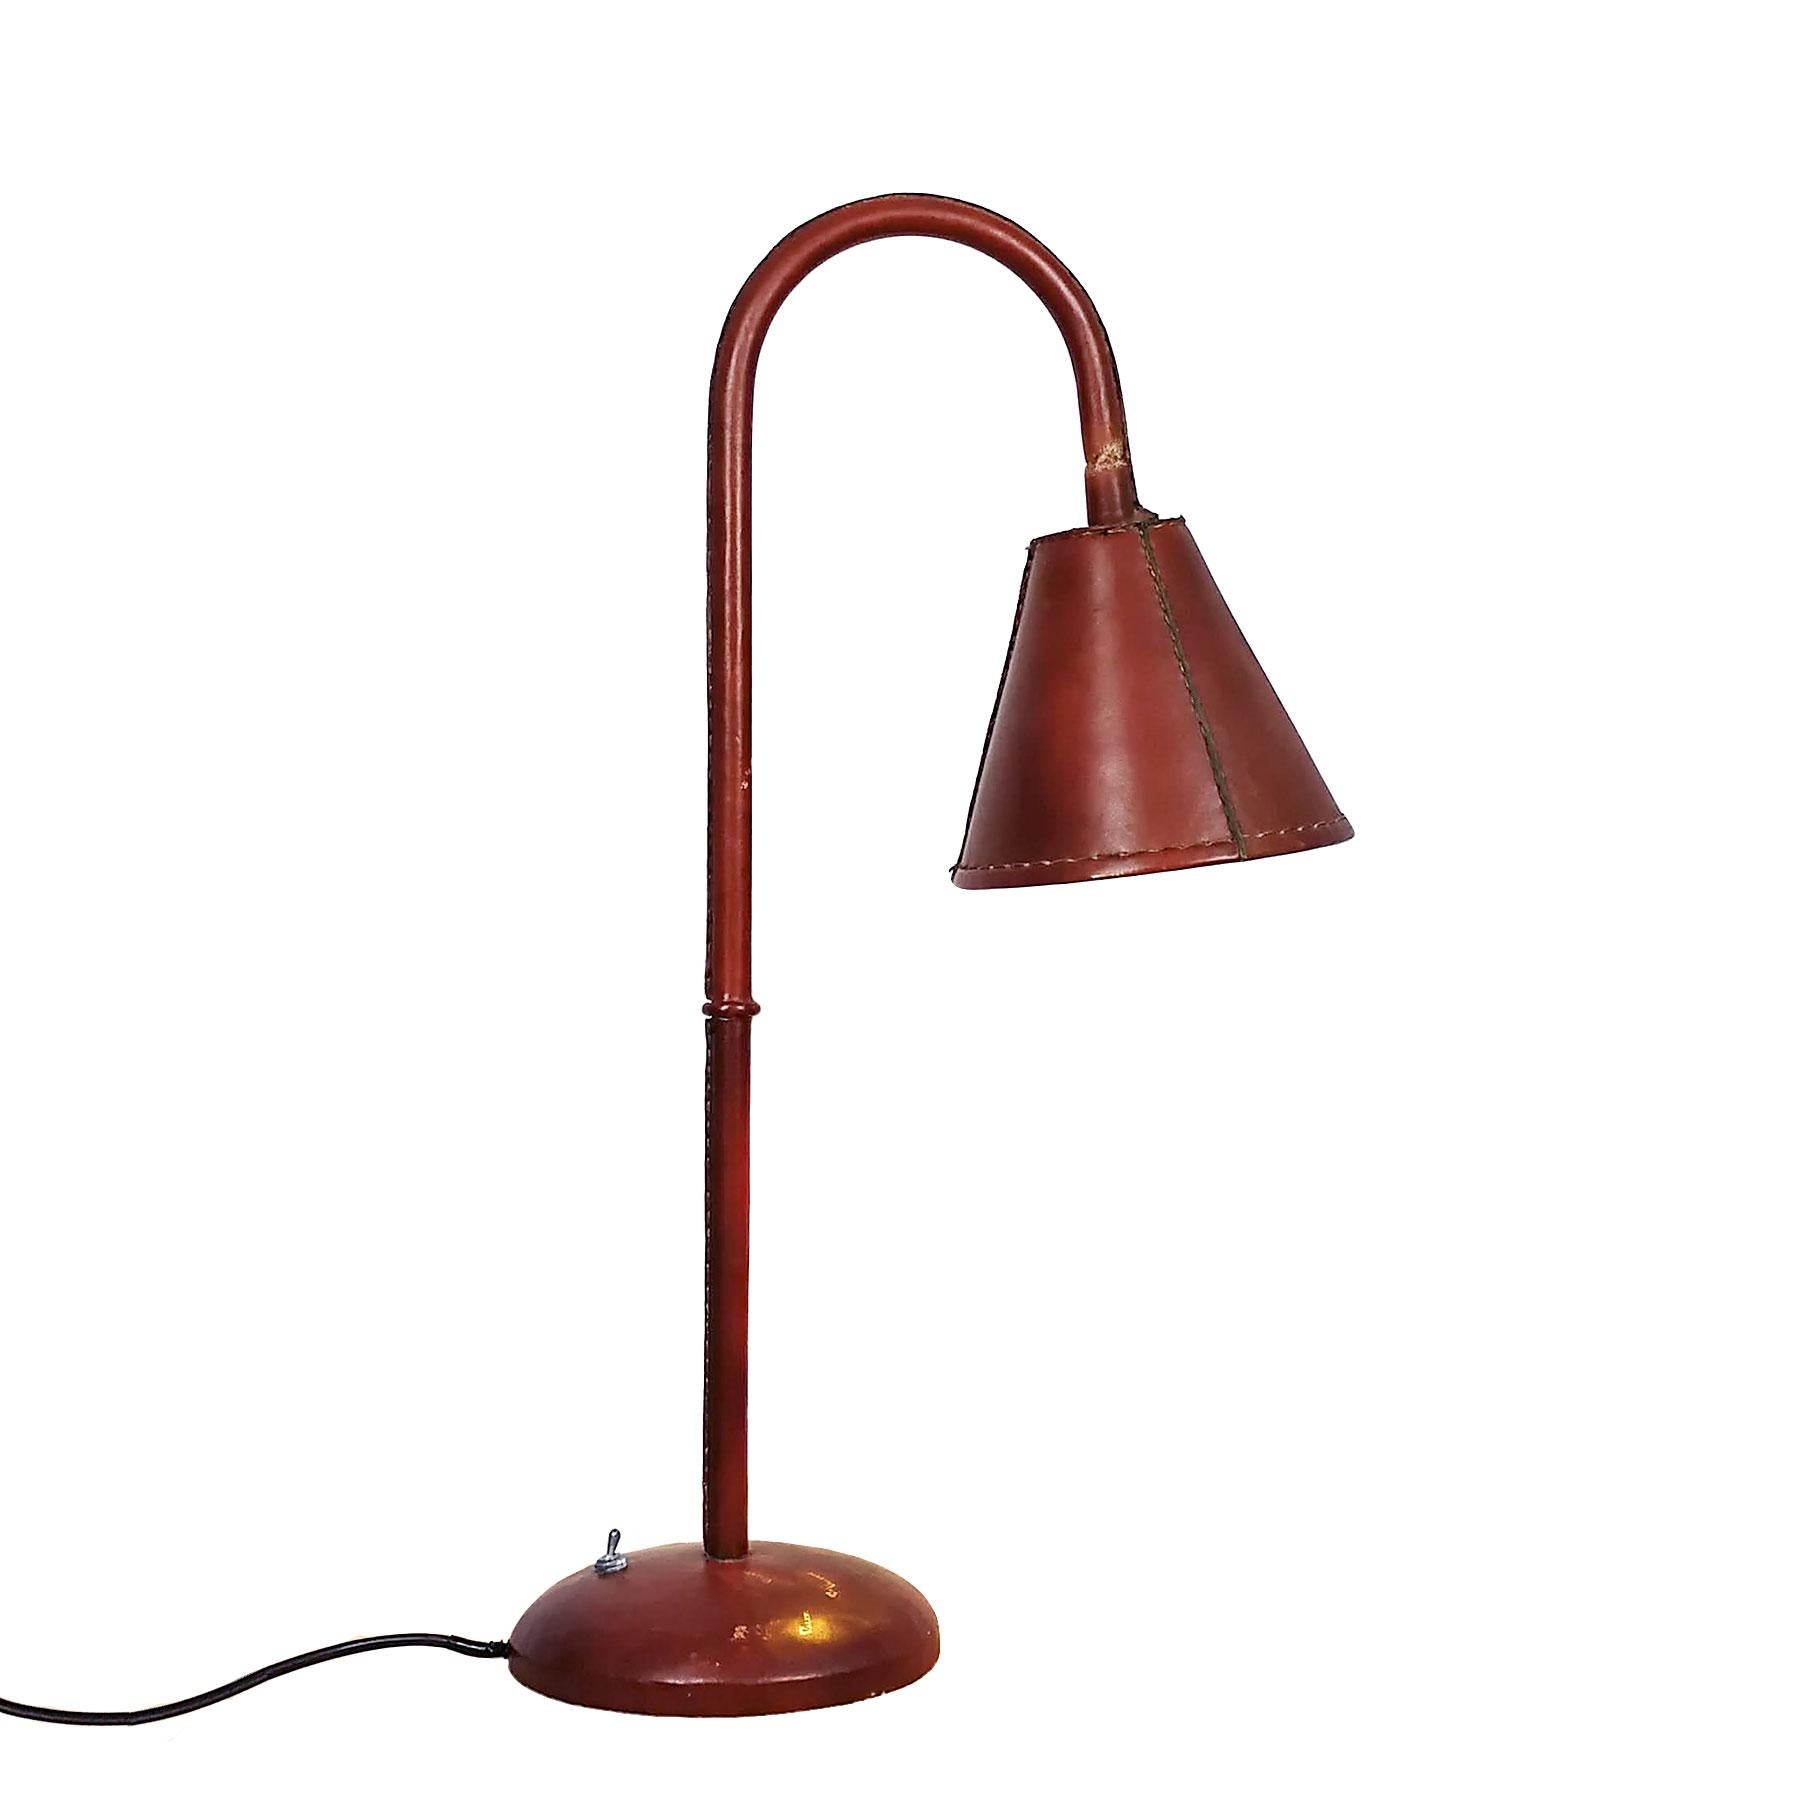 Large table lamp, metal completely sheathed with red leather, adjustable lampshade by a ball joint under the leather. Steel base for stability.
Maker: Valentí (Hot iron golden stamp in base)

Spain, Barcelona, circa 1950.